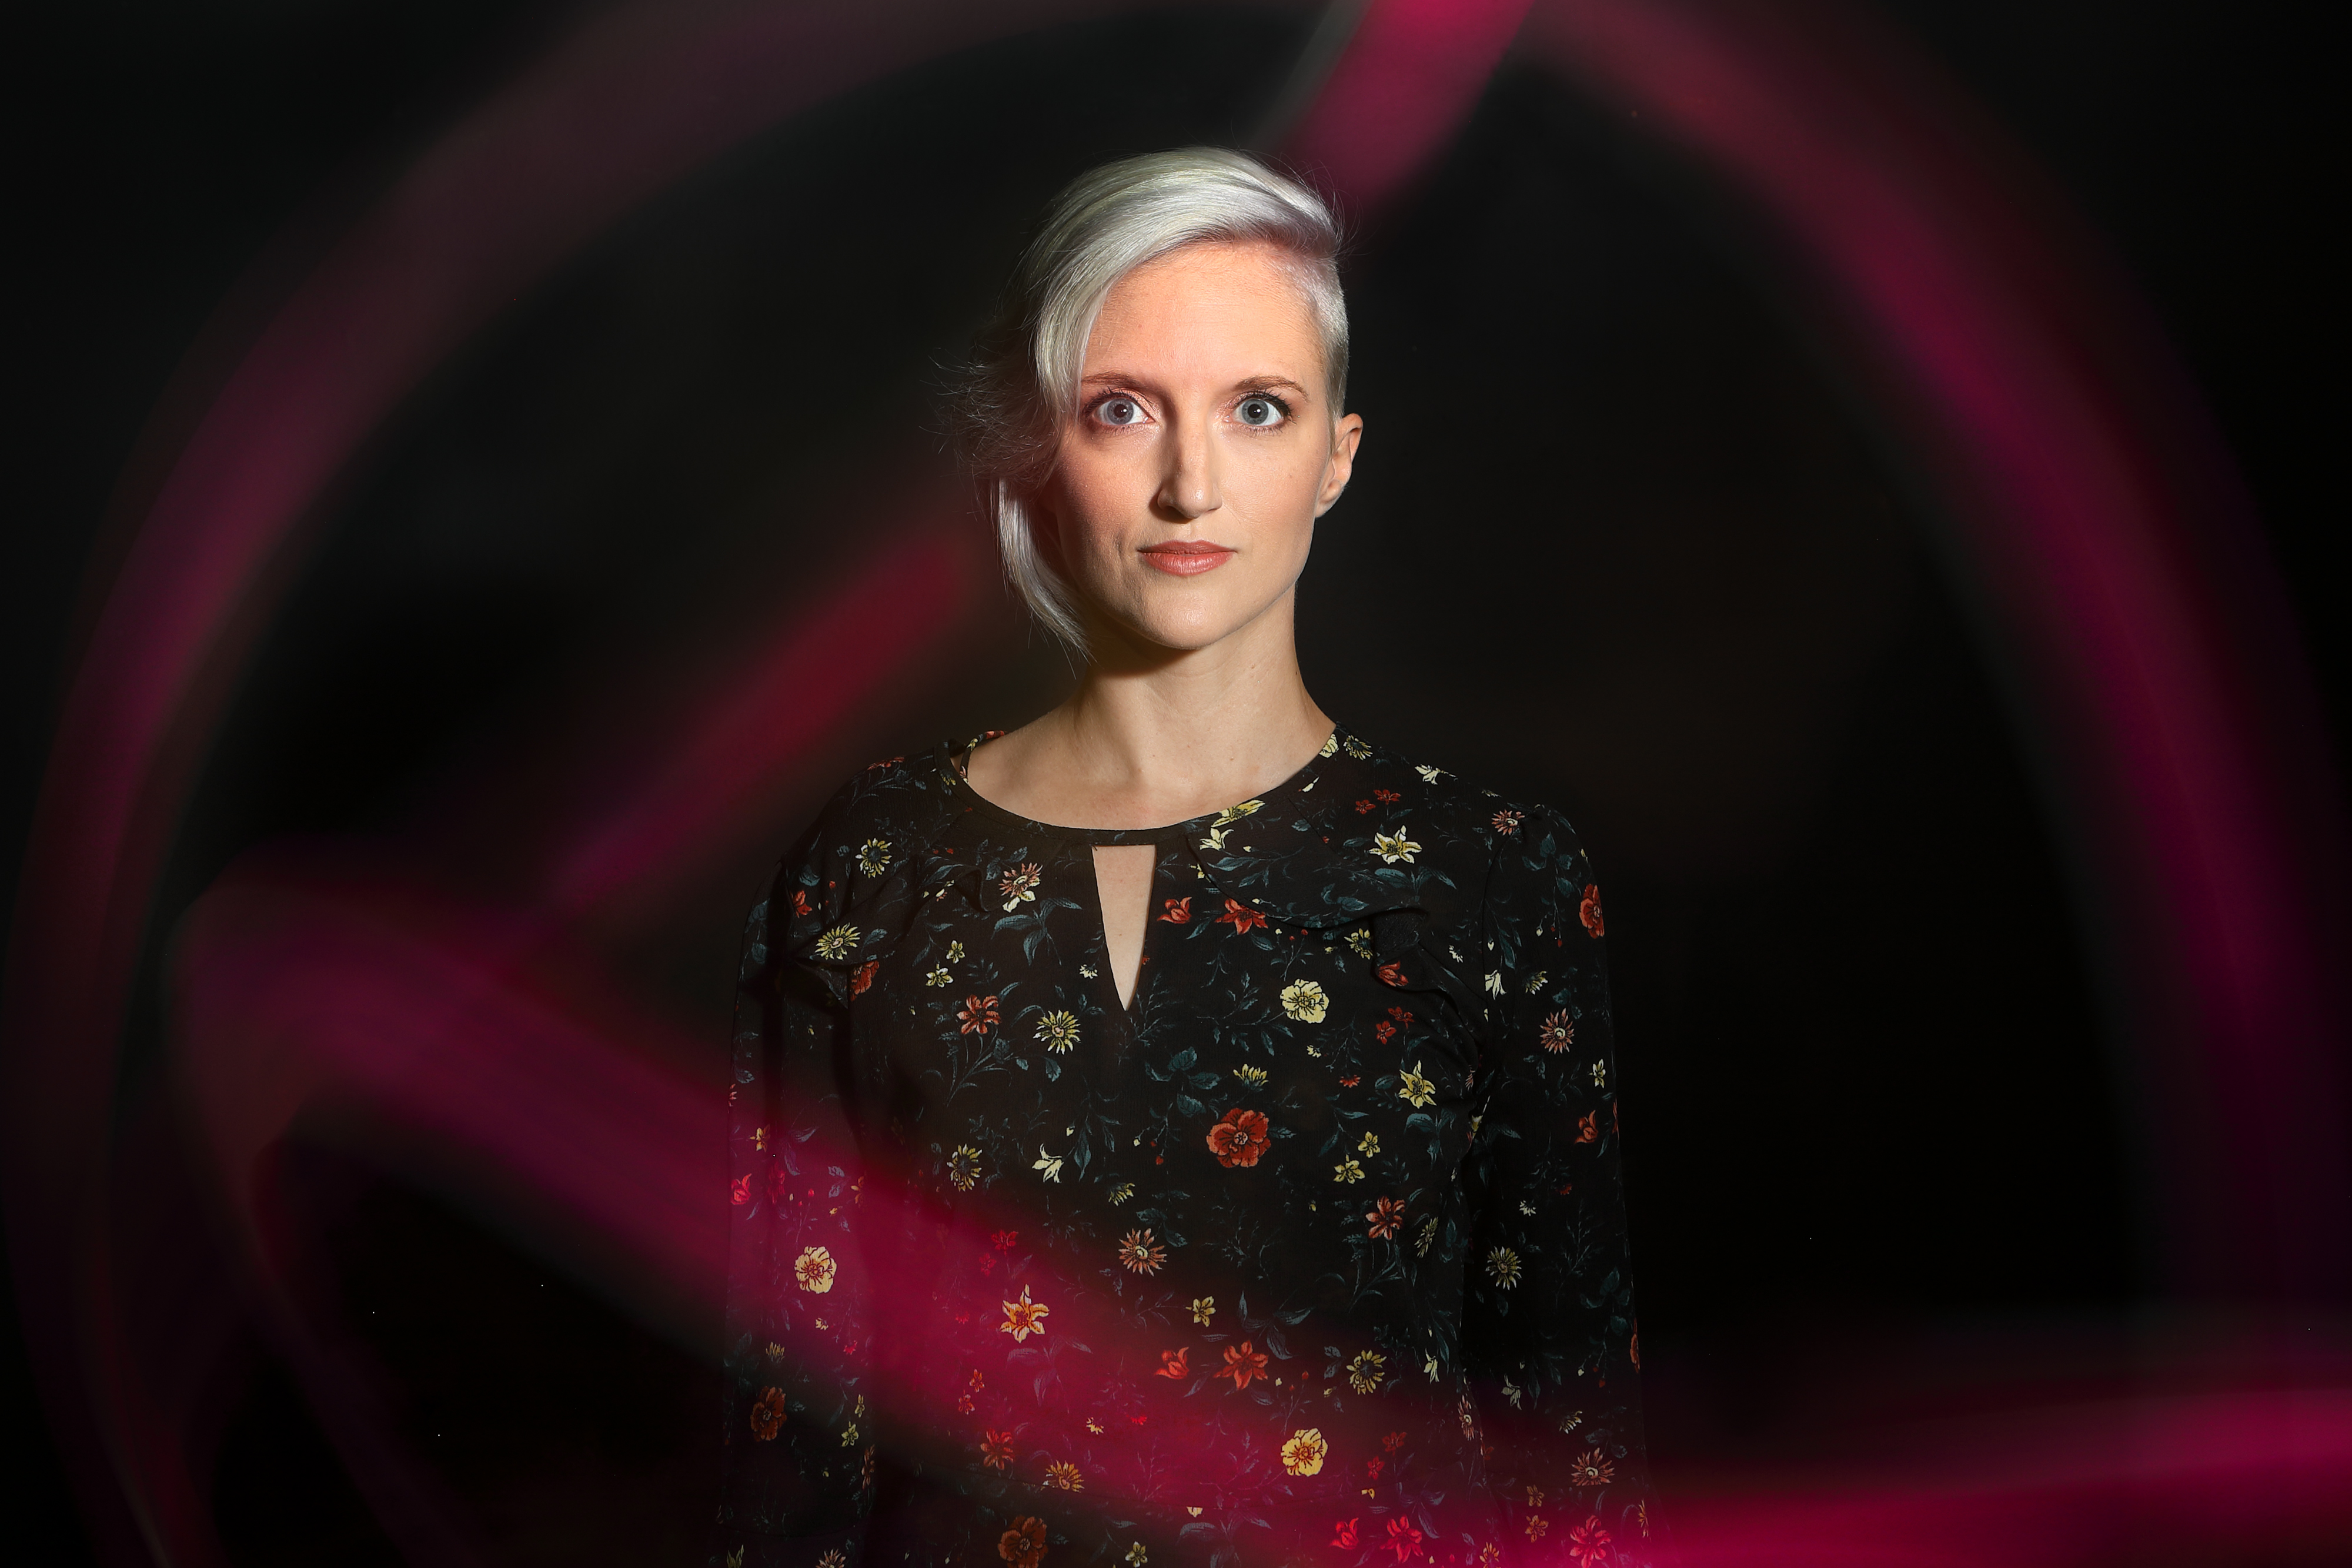 Portrait of blonde model with a dark floral dress surrounded by magenta sweeping lights